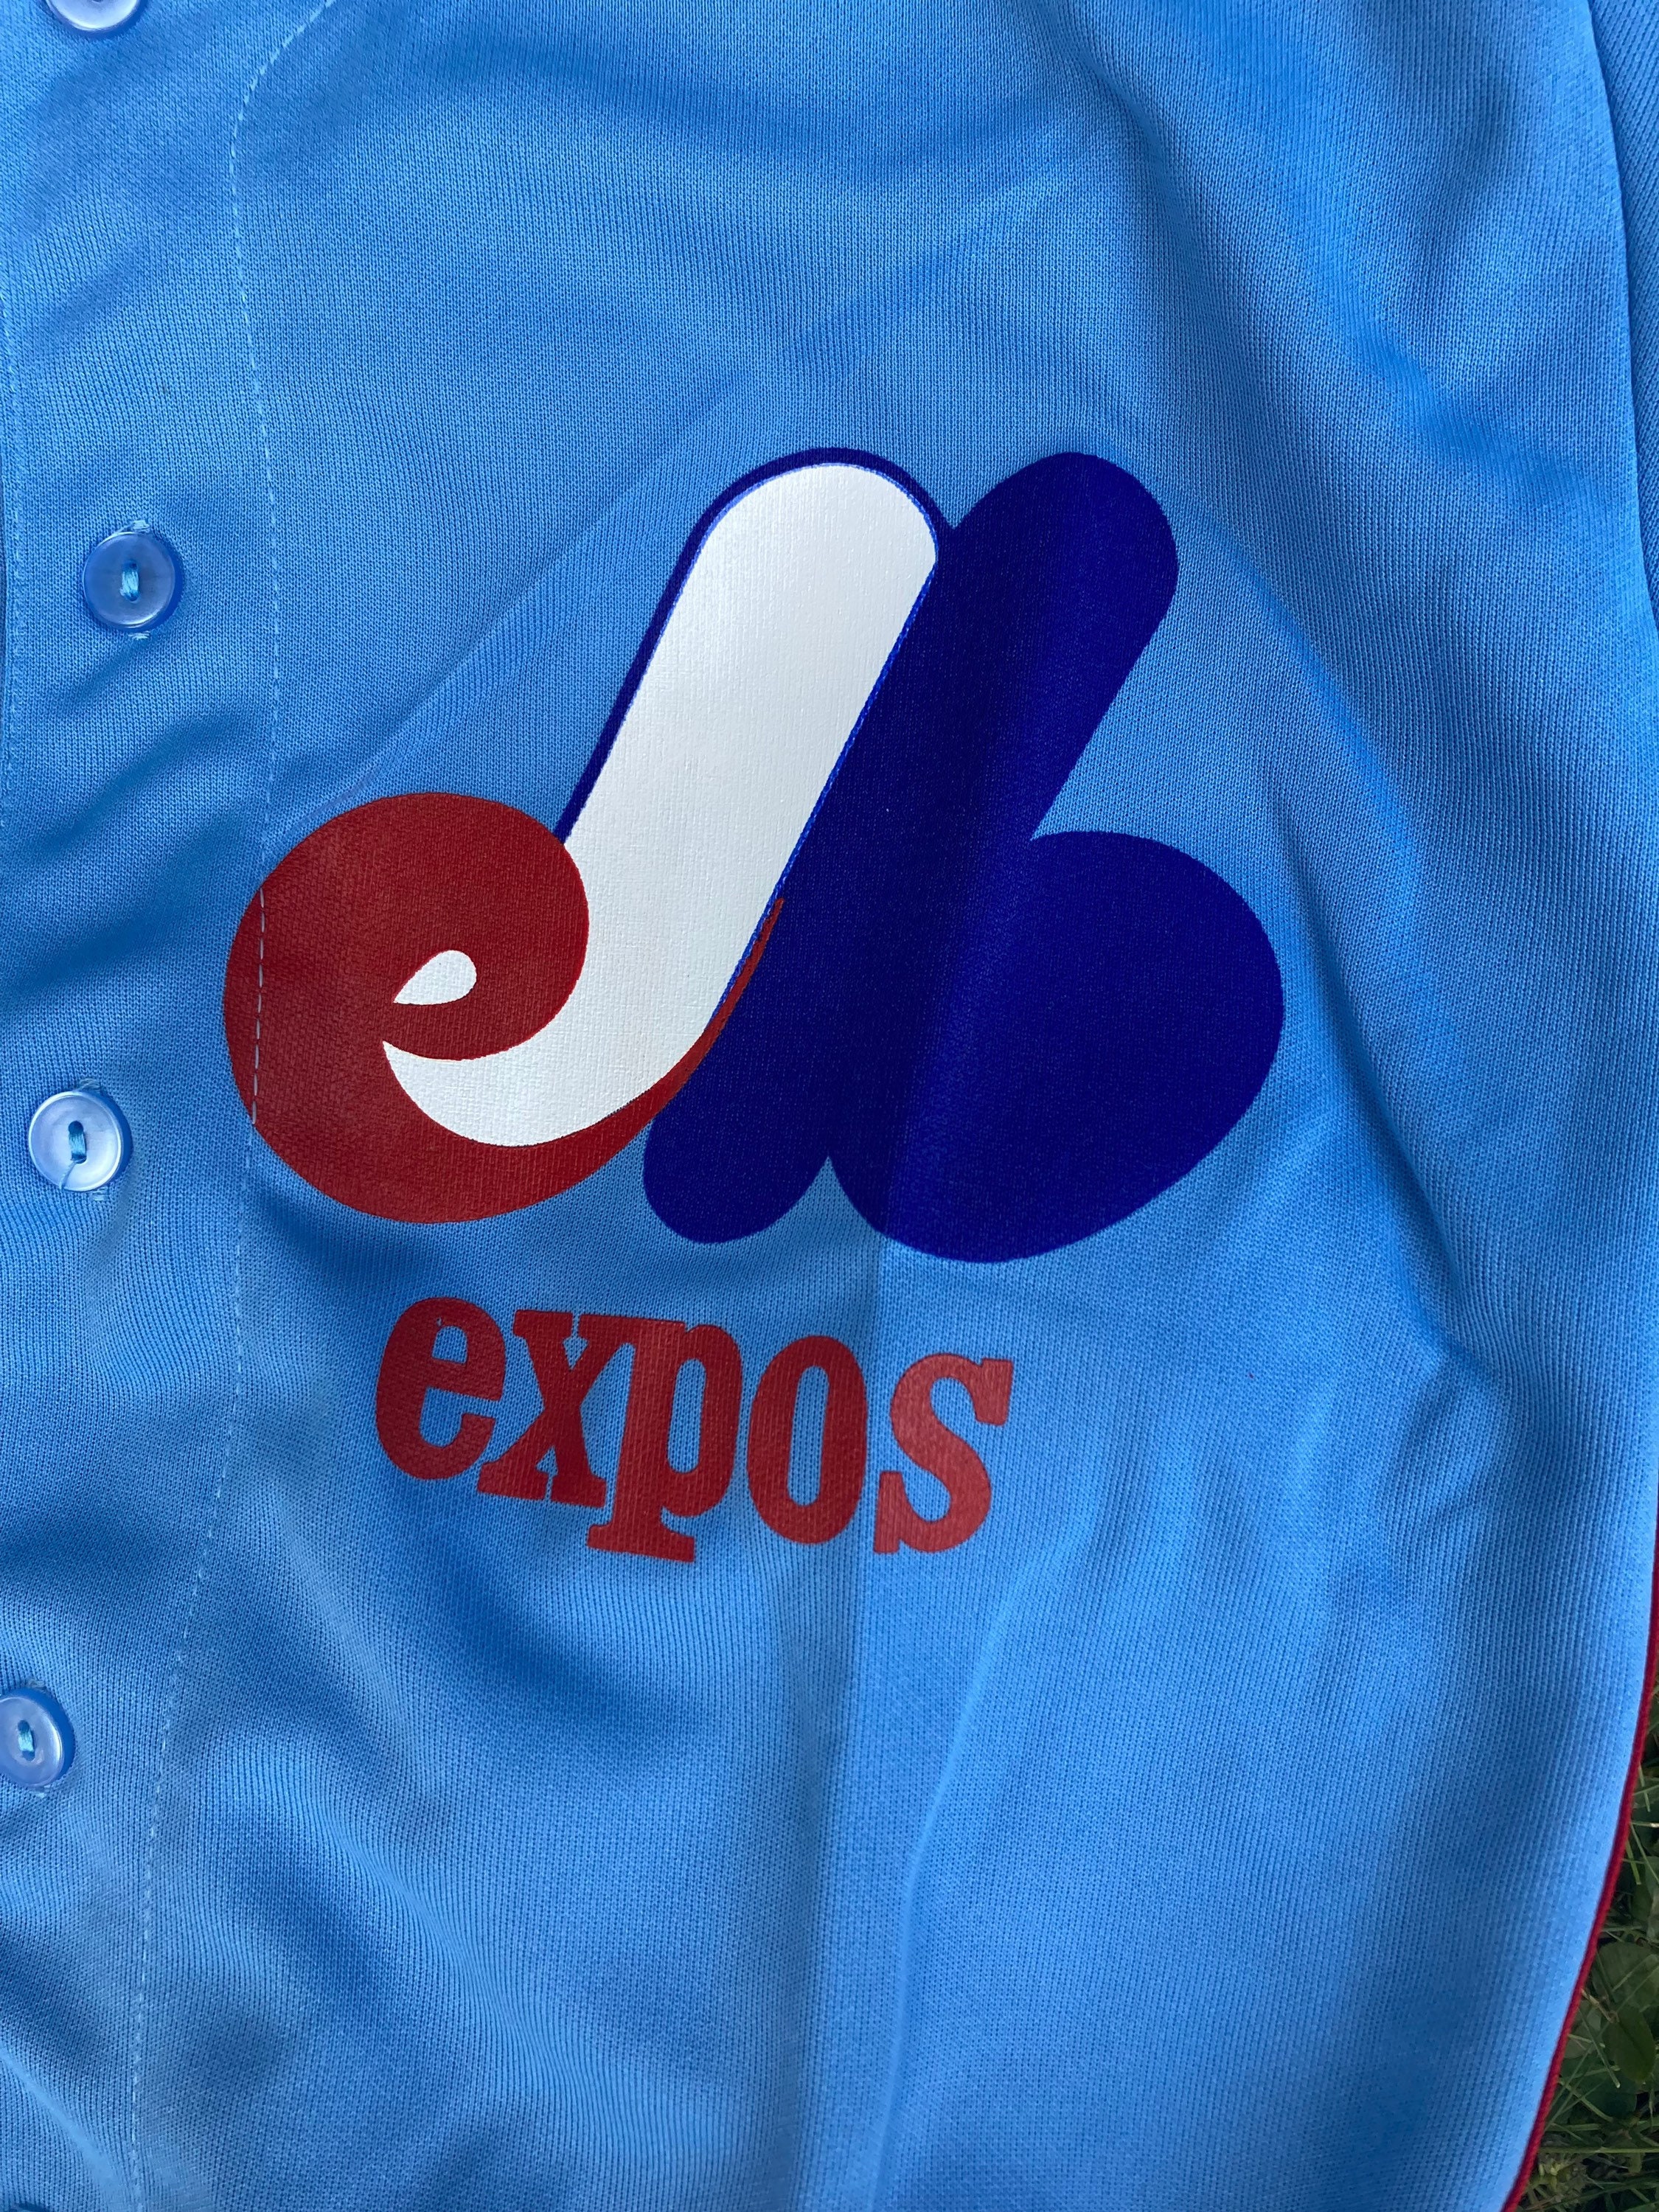 JoshRickun 1980s Vintage Montreal Expos Jersey - Button Up - Official License MLB Pro-Knit